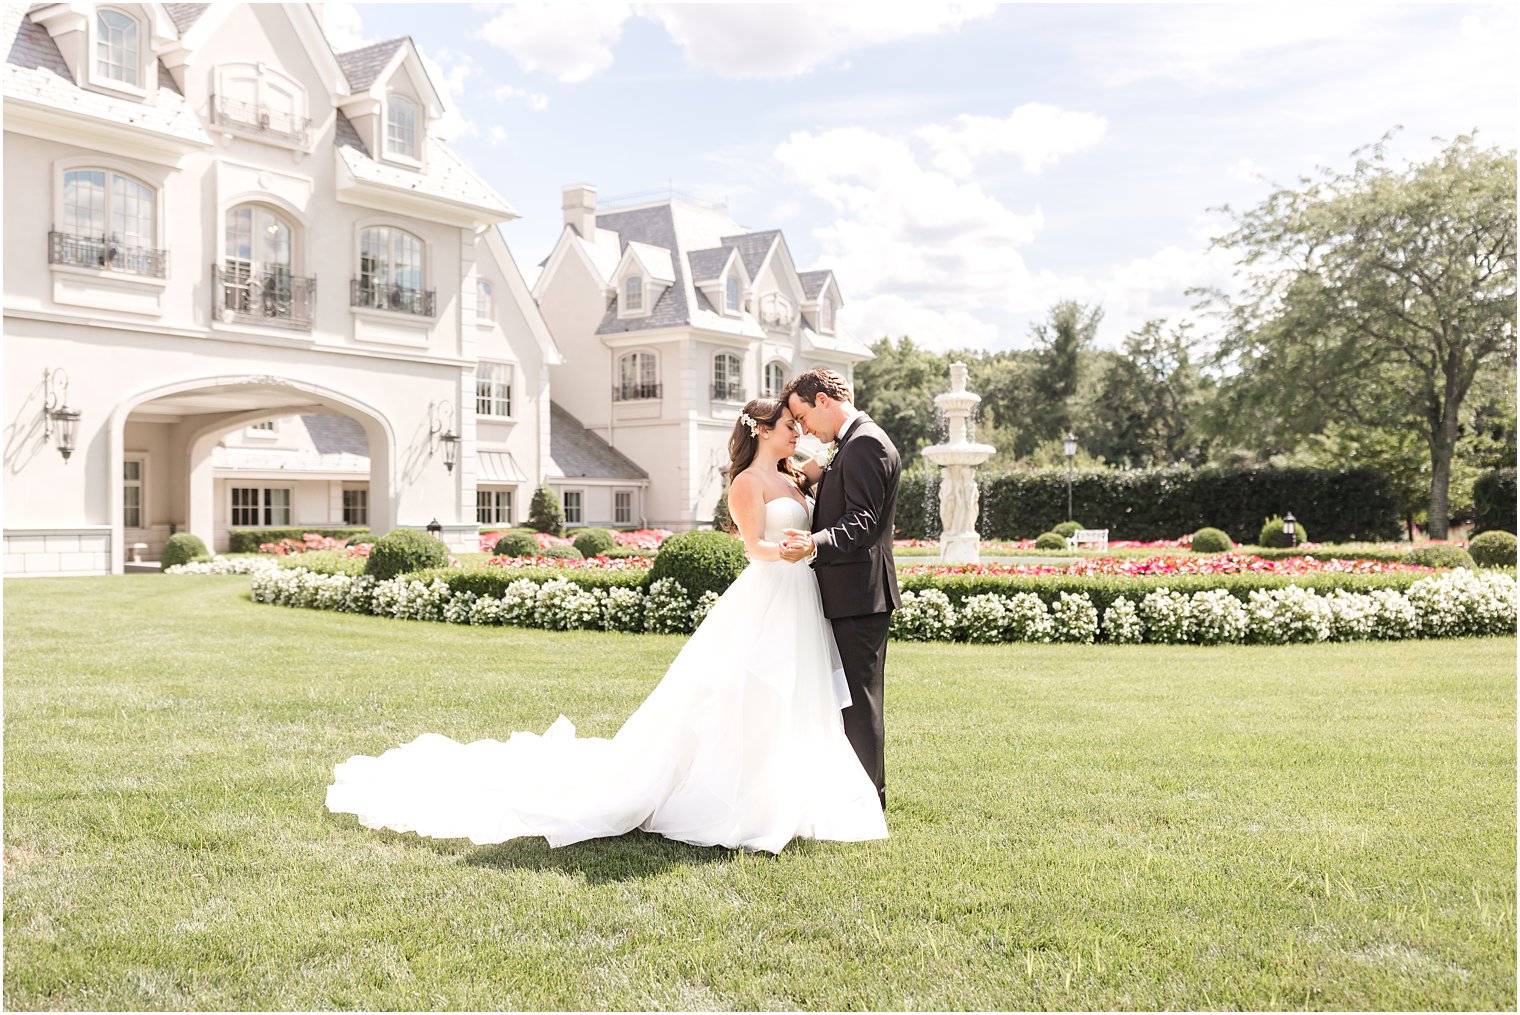 newlyweds stand together on lawn at Park Chateau Estate